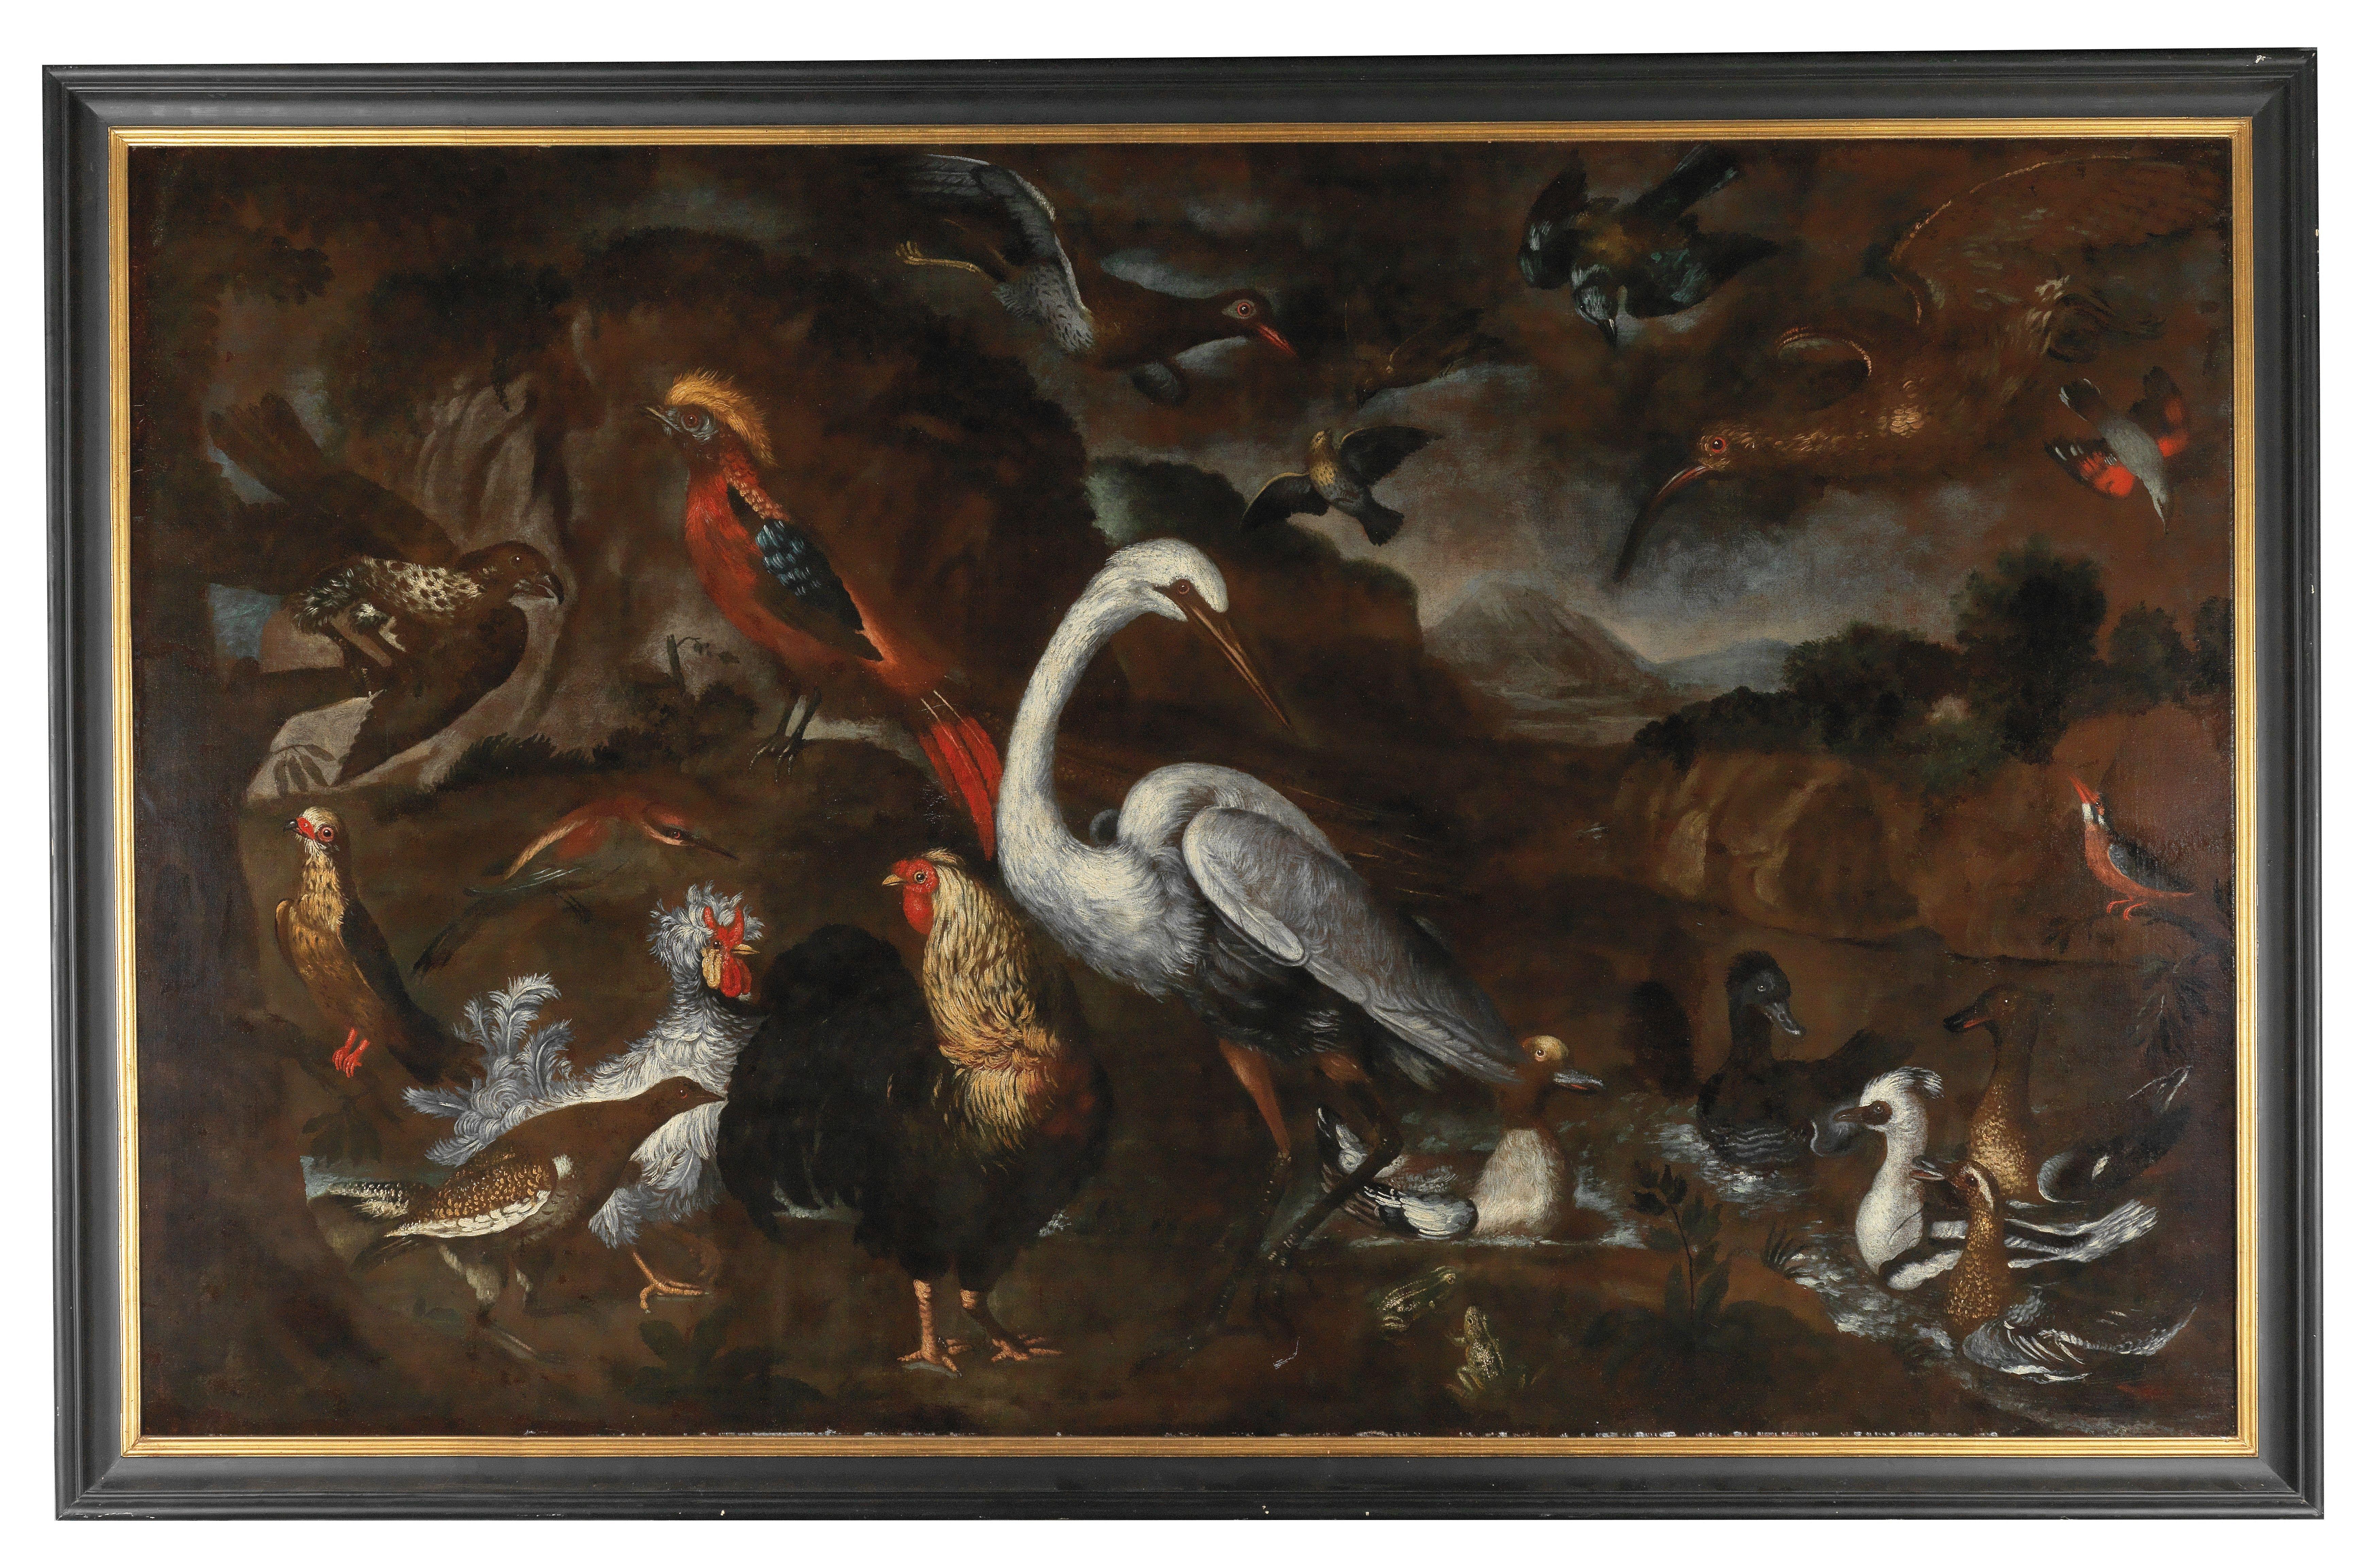 Pietro Neri Scacciati
(Florence 1684–1749) 
Native and exotic birds from the aviaries of Grand Duke Cosimo III of Tuscany, 
oil on canvas, 144 x 232 cm, framed

A very chic and timeless large old master painting to group a room around.